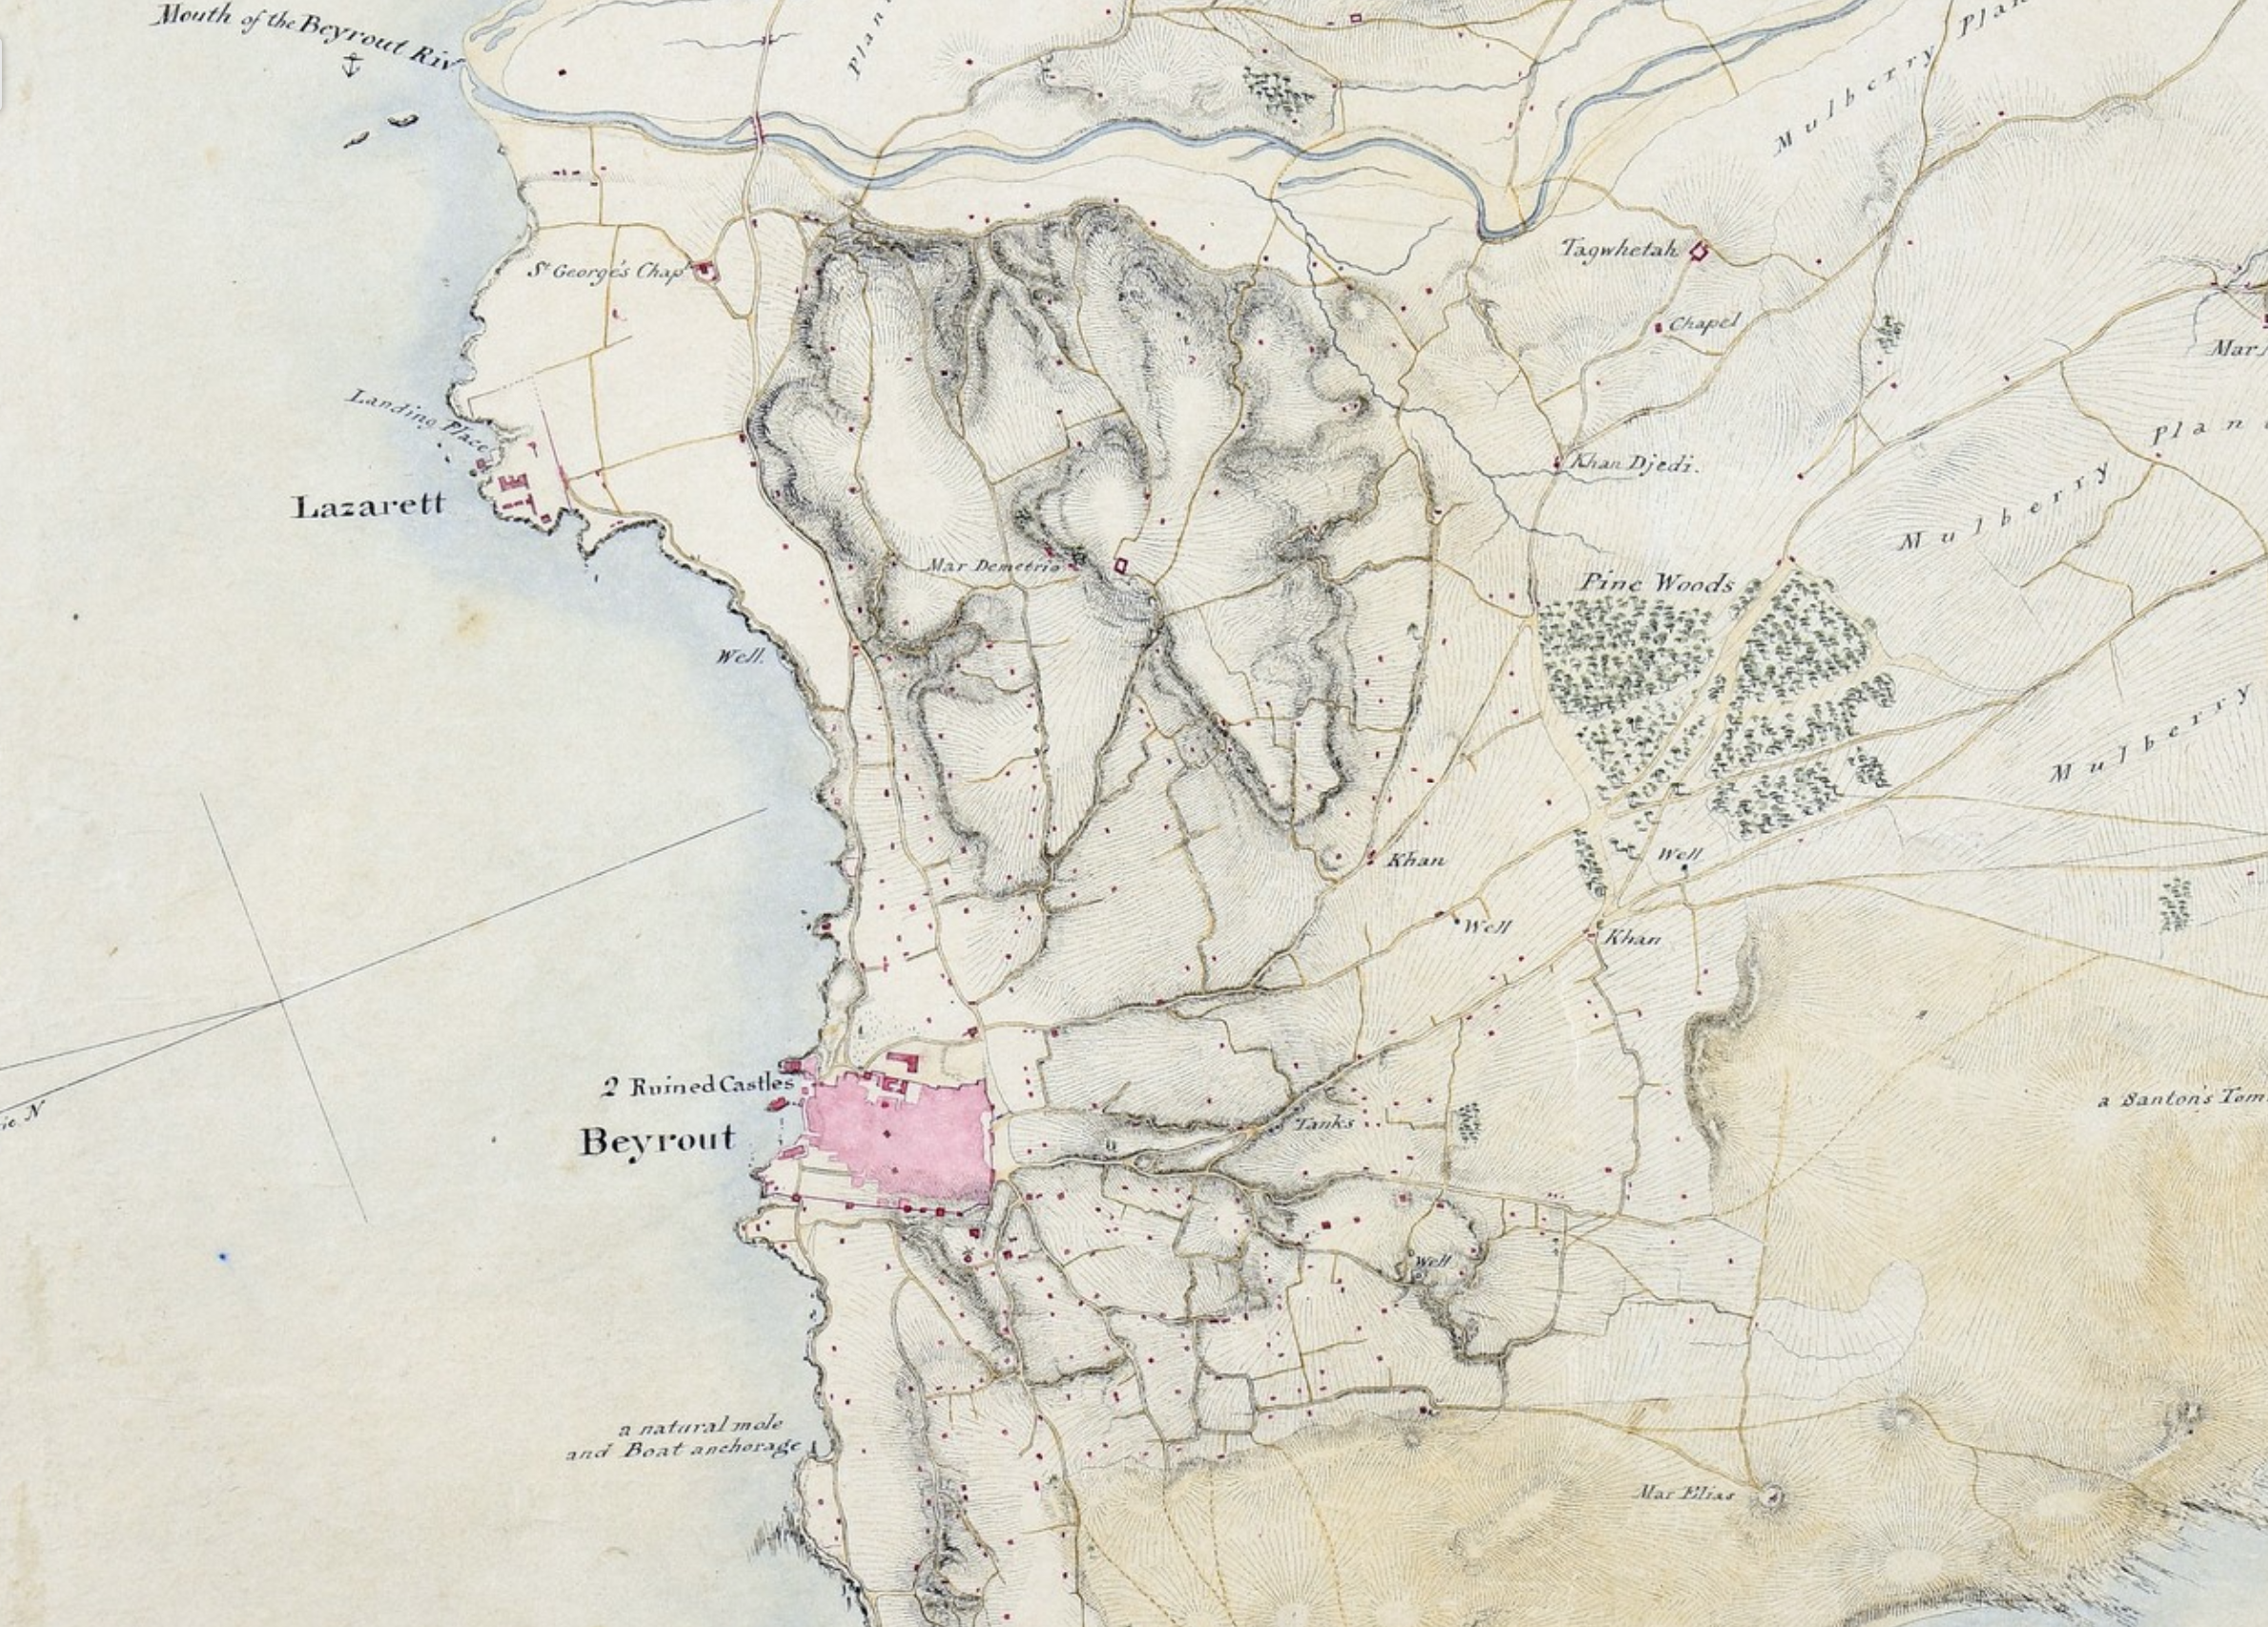 1841 Rochfort Scott map showing Beirut and the lazzaretto, where travellers would quarantine prior to entering the city. (